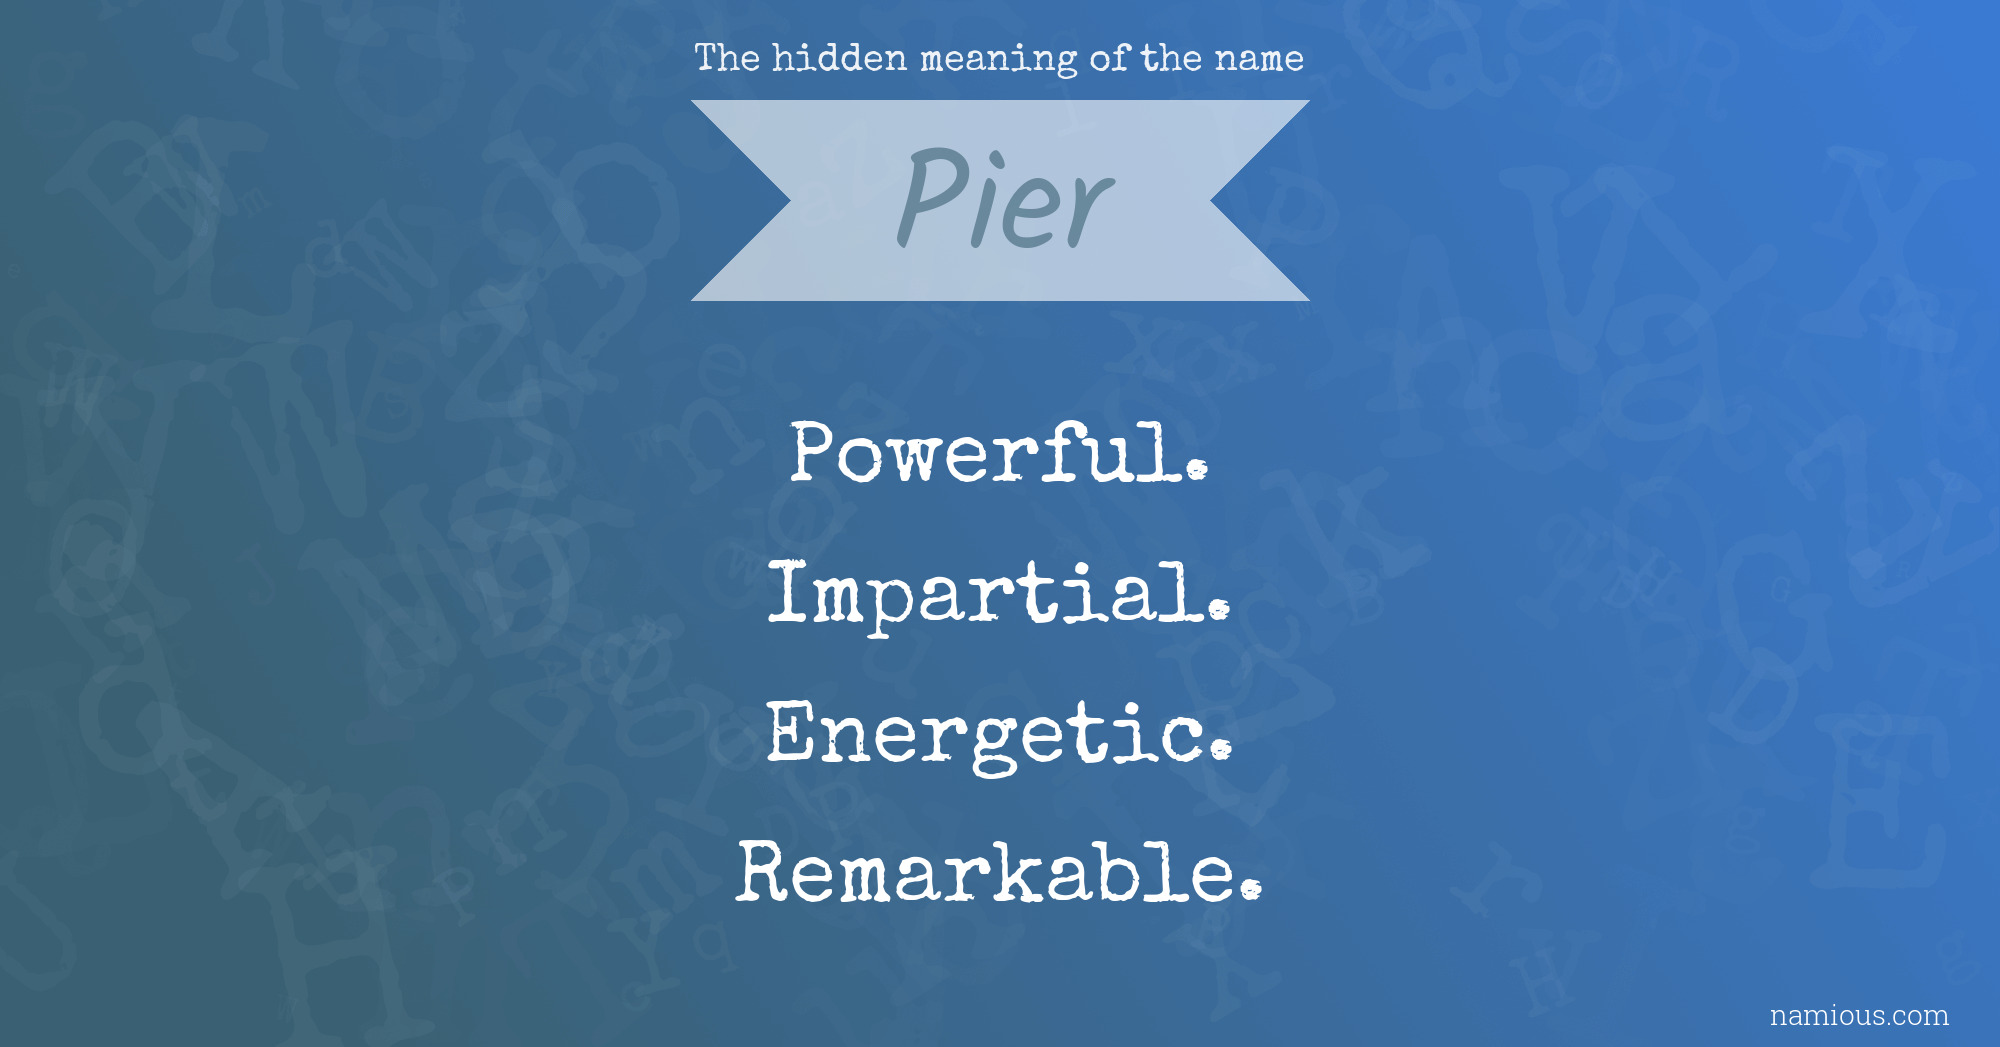 The hidden meaning of the name Pier